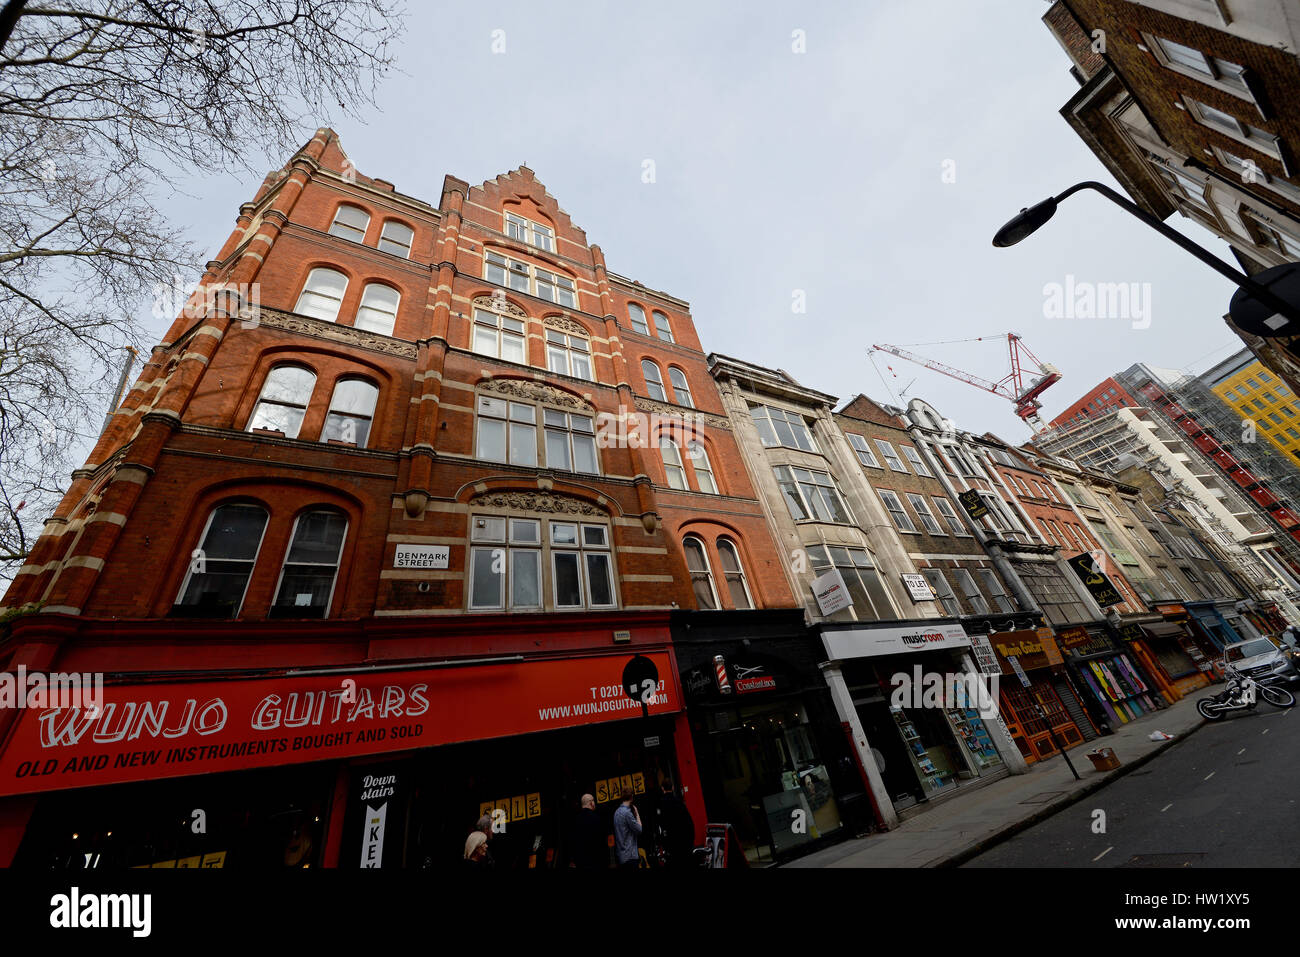 Denmark St is a street on the edge of London's West End running from Charing Cross Rd to St Giles.Since the 50s it has been associated with Brit music Stock Photo